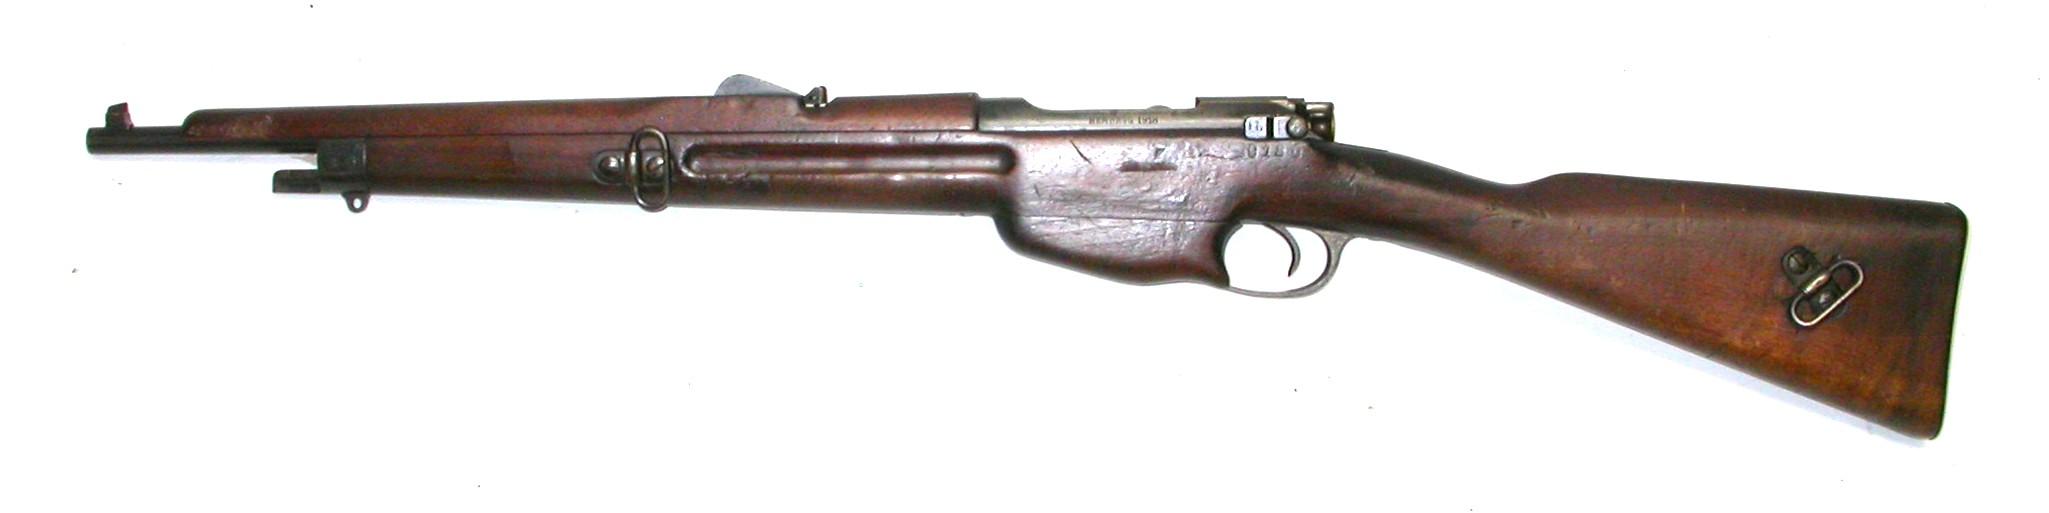 Dutch Military WWI Hemberg M1898 Manlicher Bolt-Action Carbine FFL Required 9186H (MGN1)